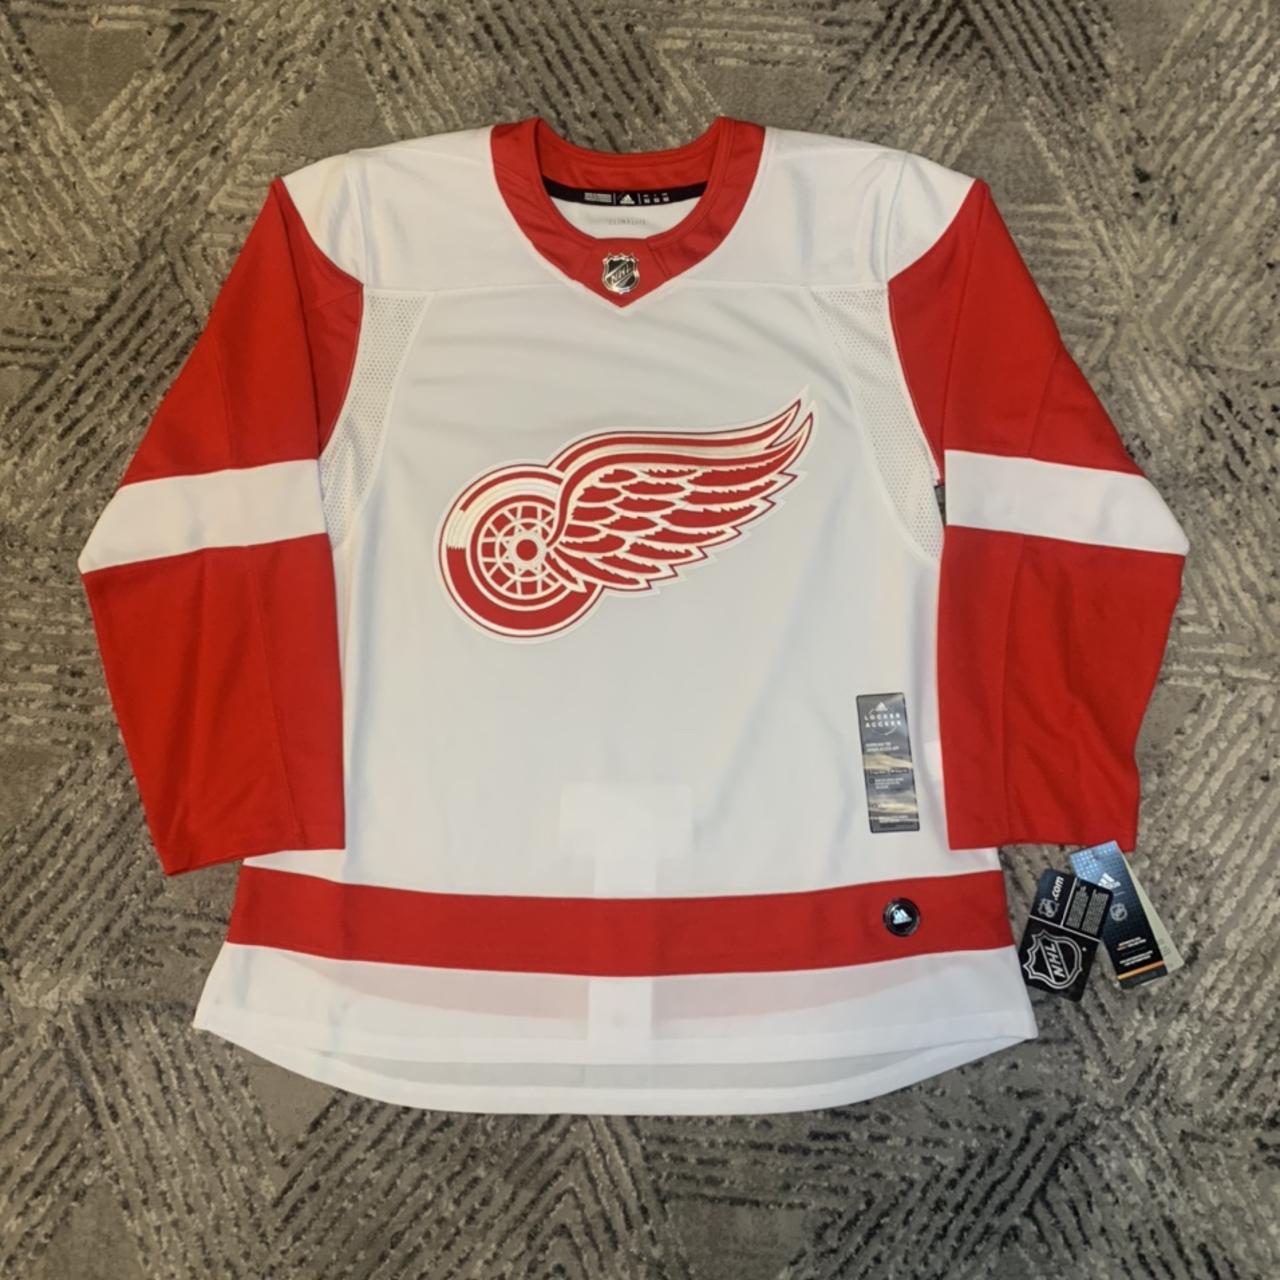 Adidas Detroit Red Wings Red Authentic Pro Jersey 52